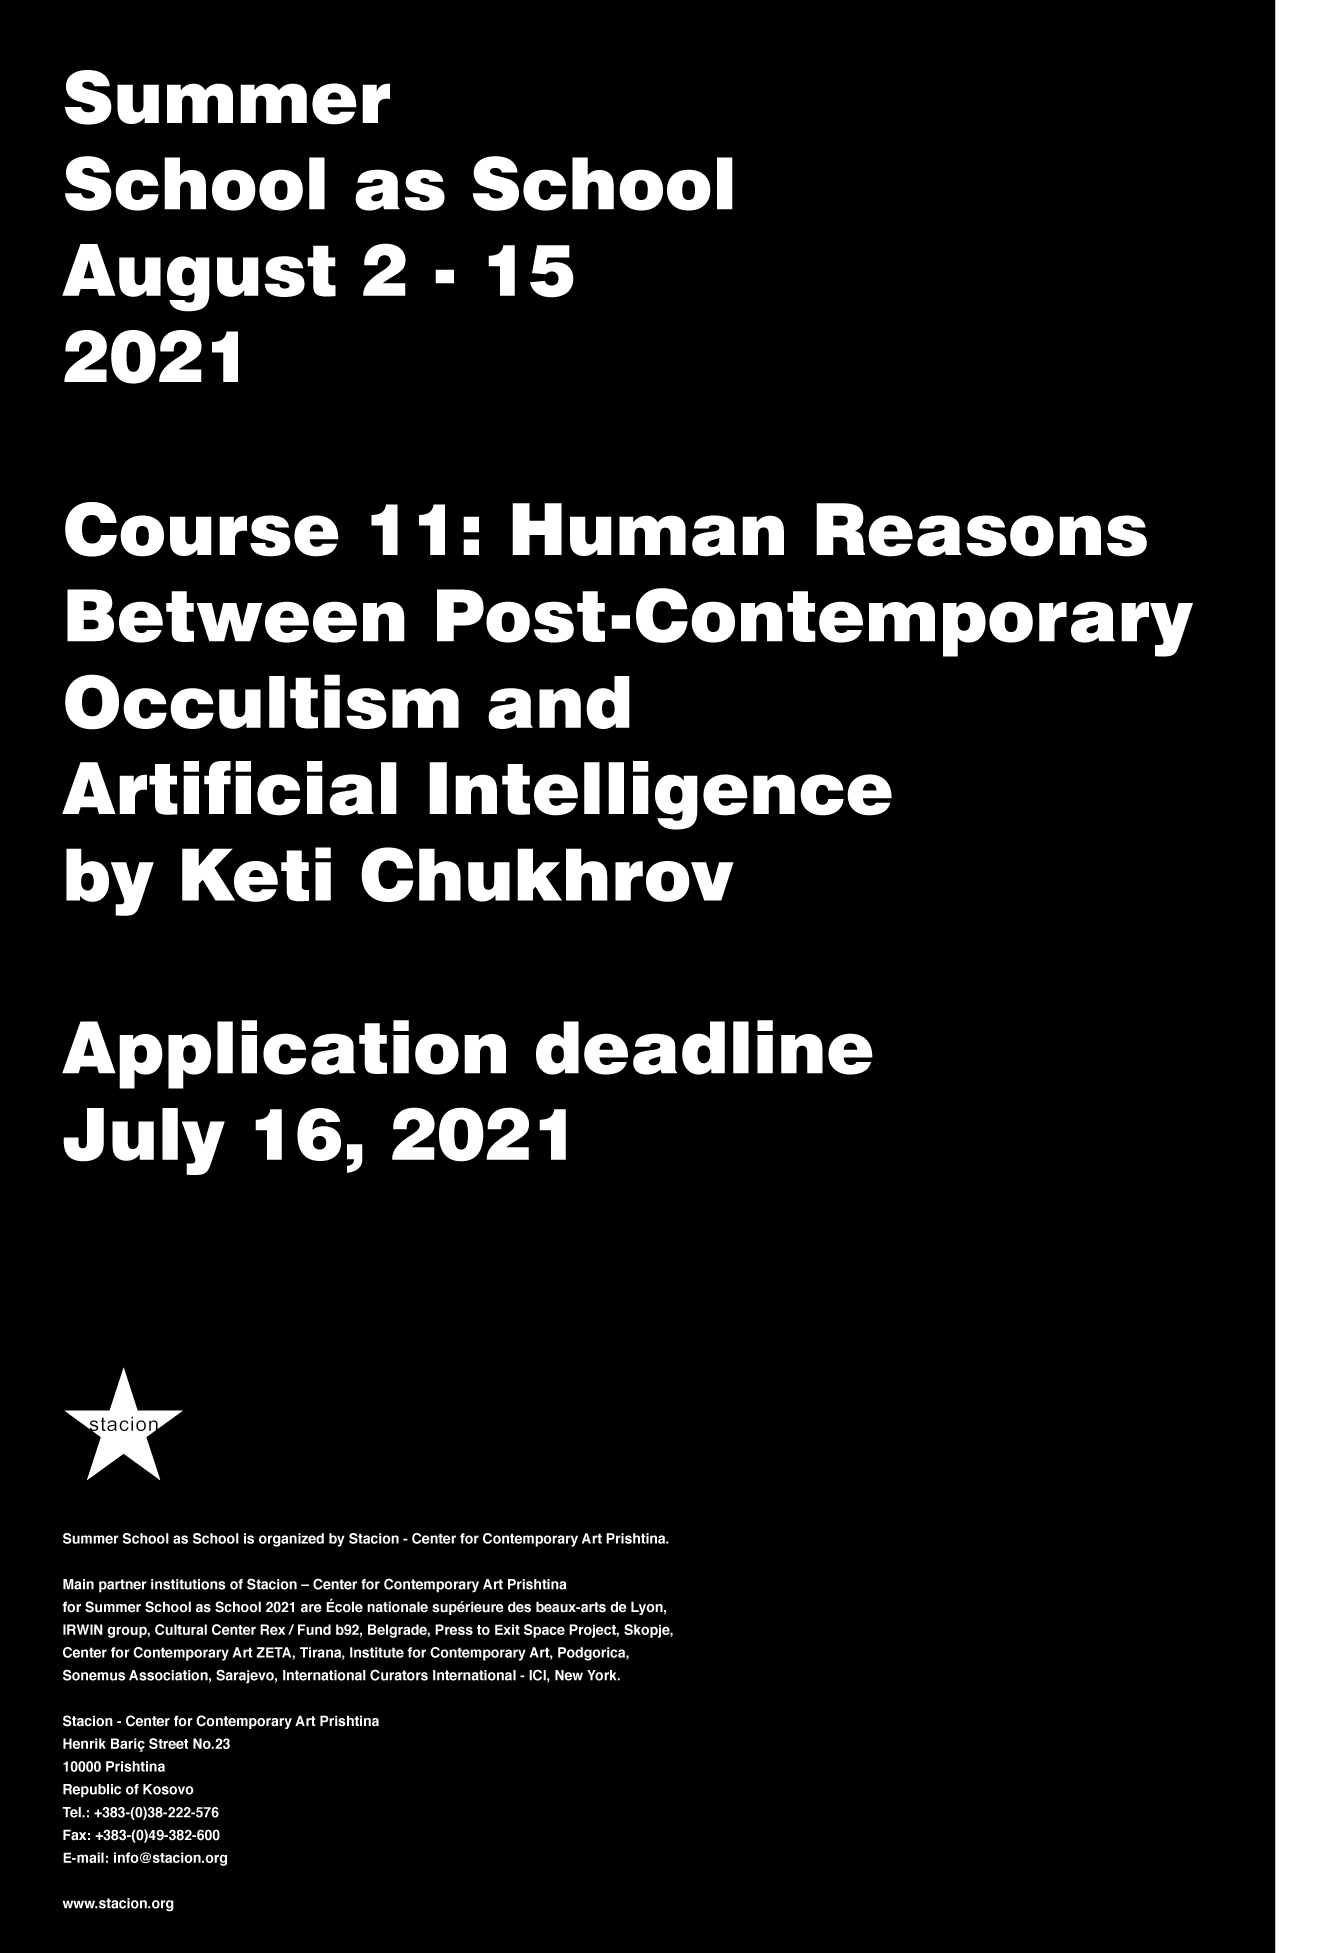 Course 11: Human Reasons Between Post- Contemporary Occultism and Artificial Intelligence